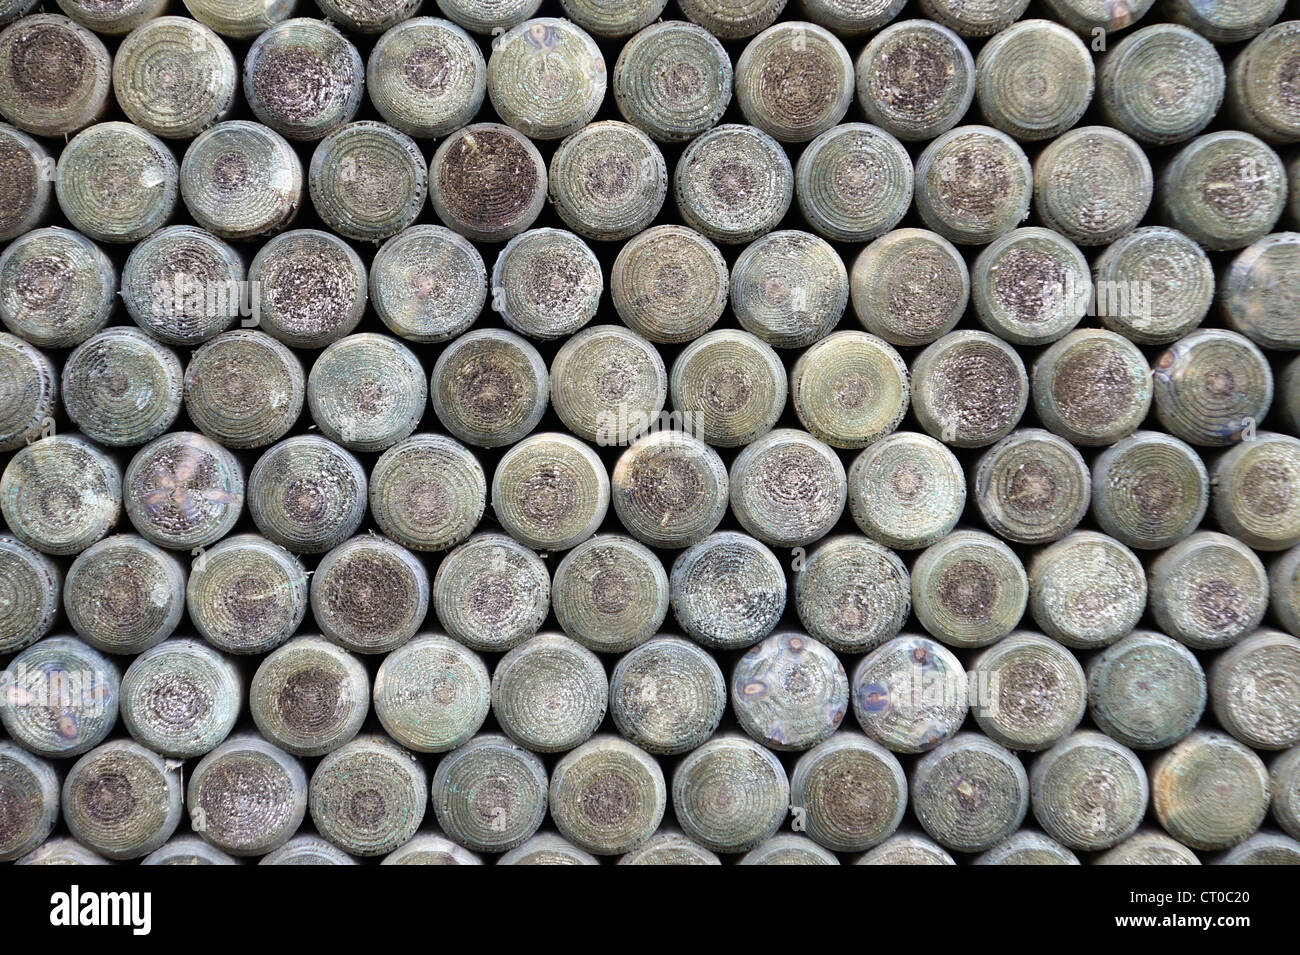 Round wood is densely laid in a stack Stock Photo